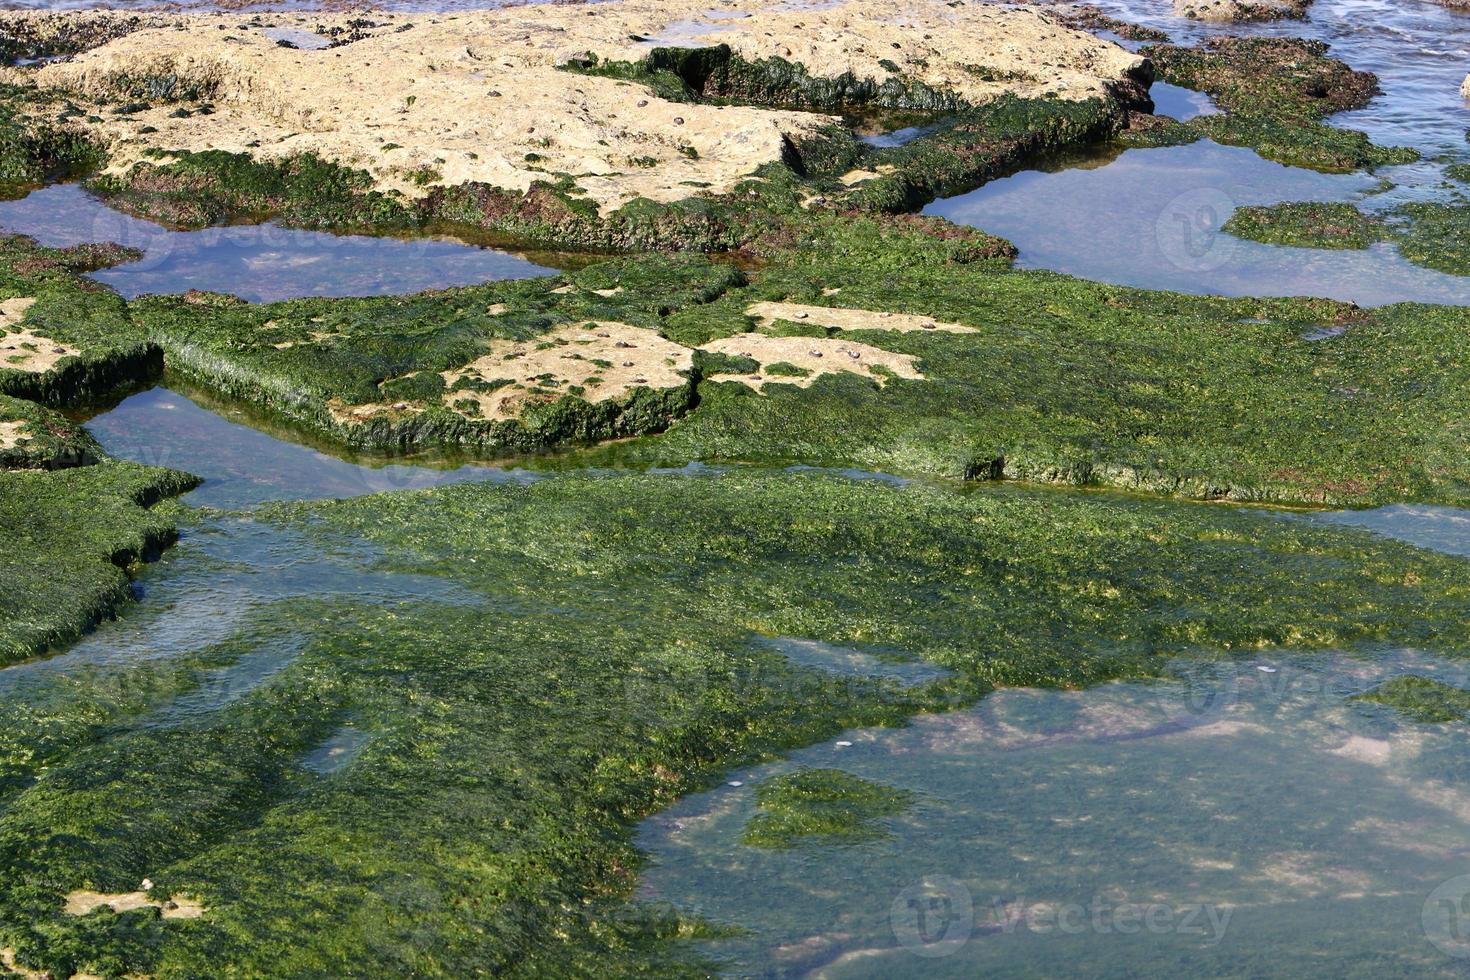 Algae on the rocks on the shores of the Mediterranean Sea in northern Israel. photo